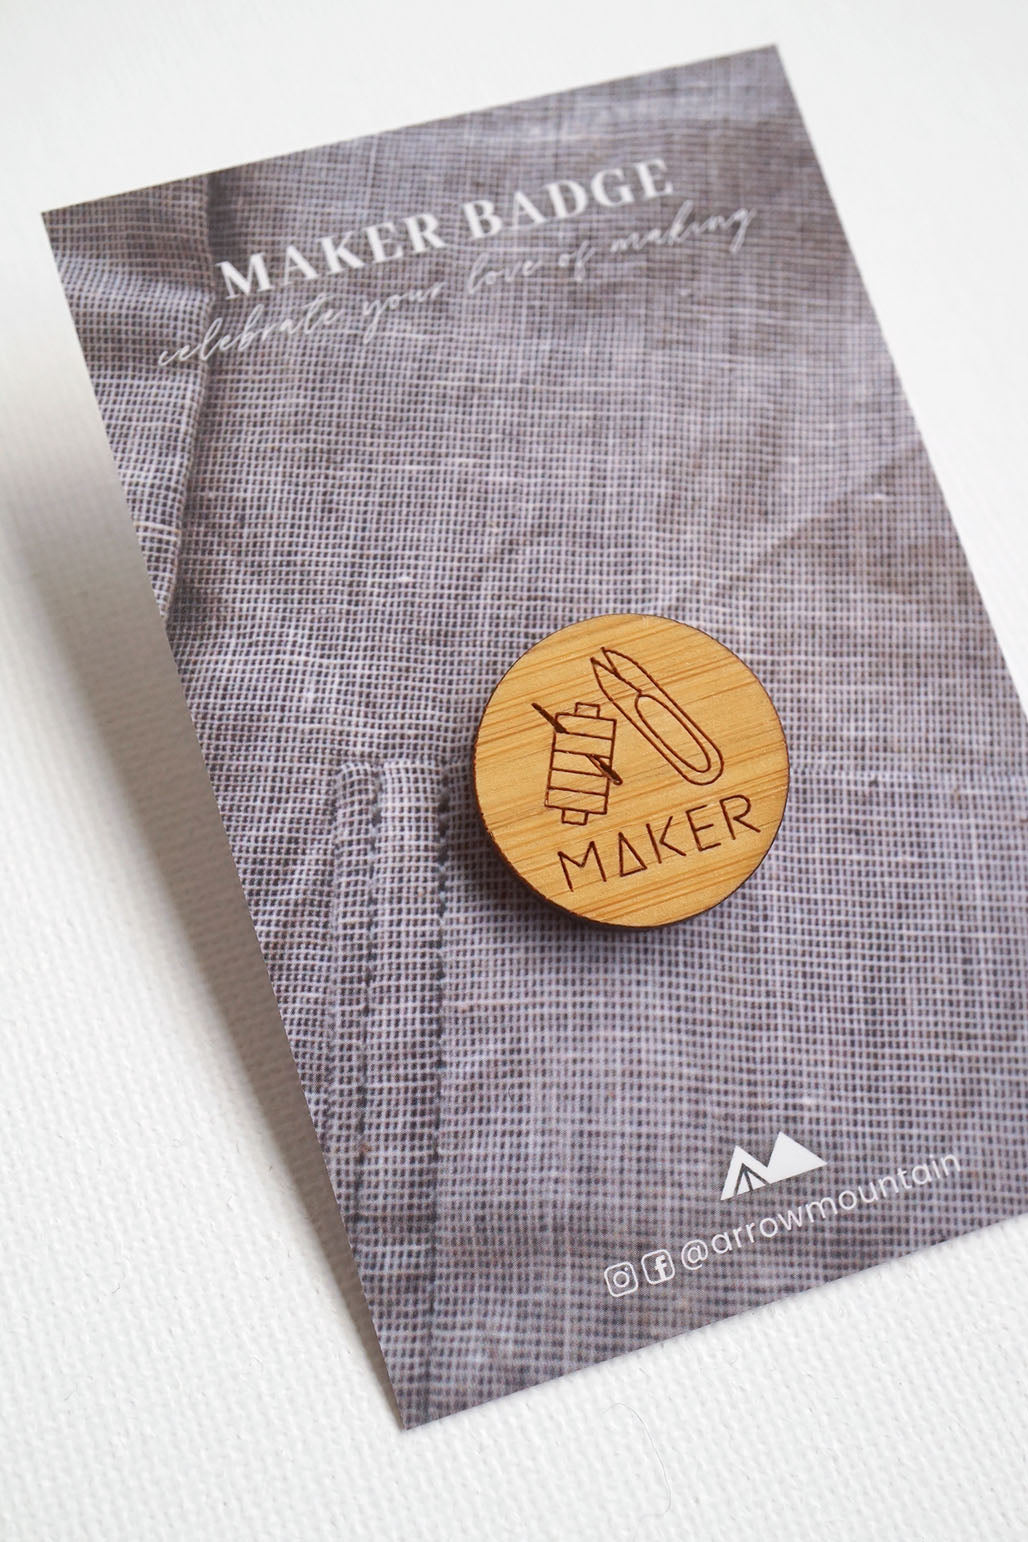 The Maker Badge - Hand Sewing